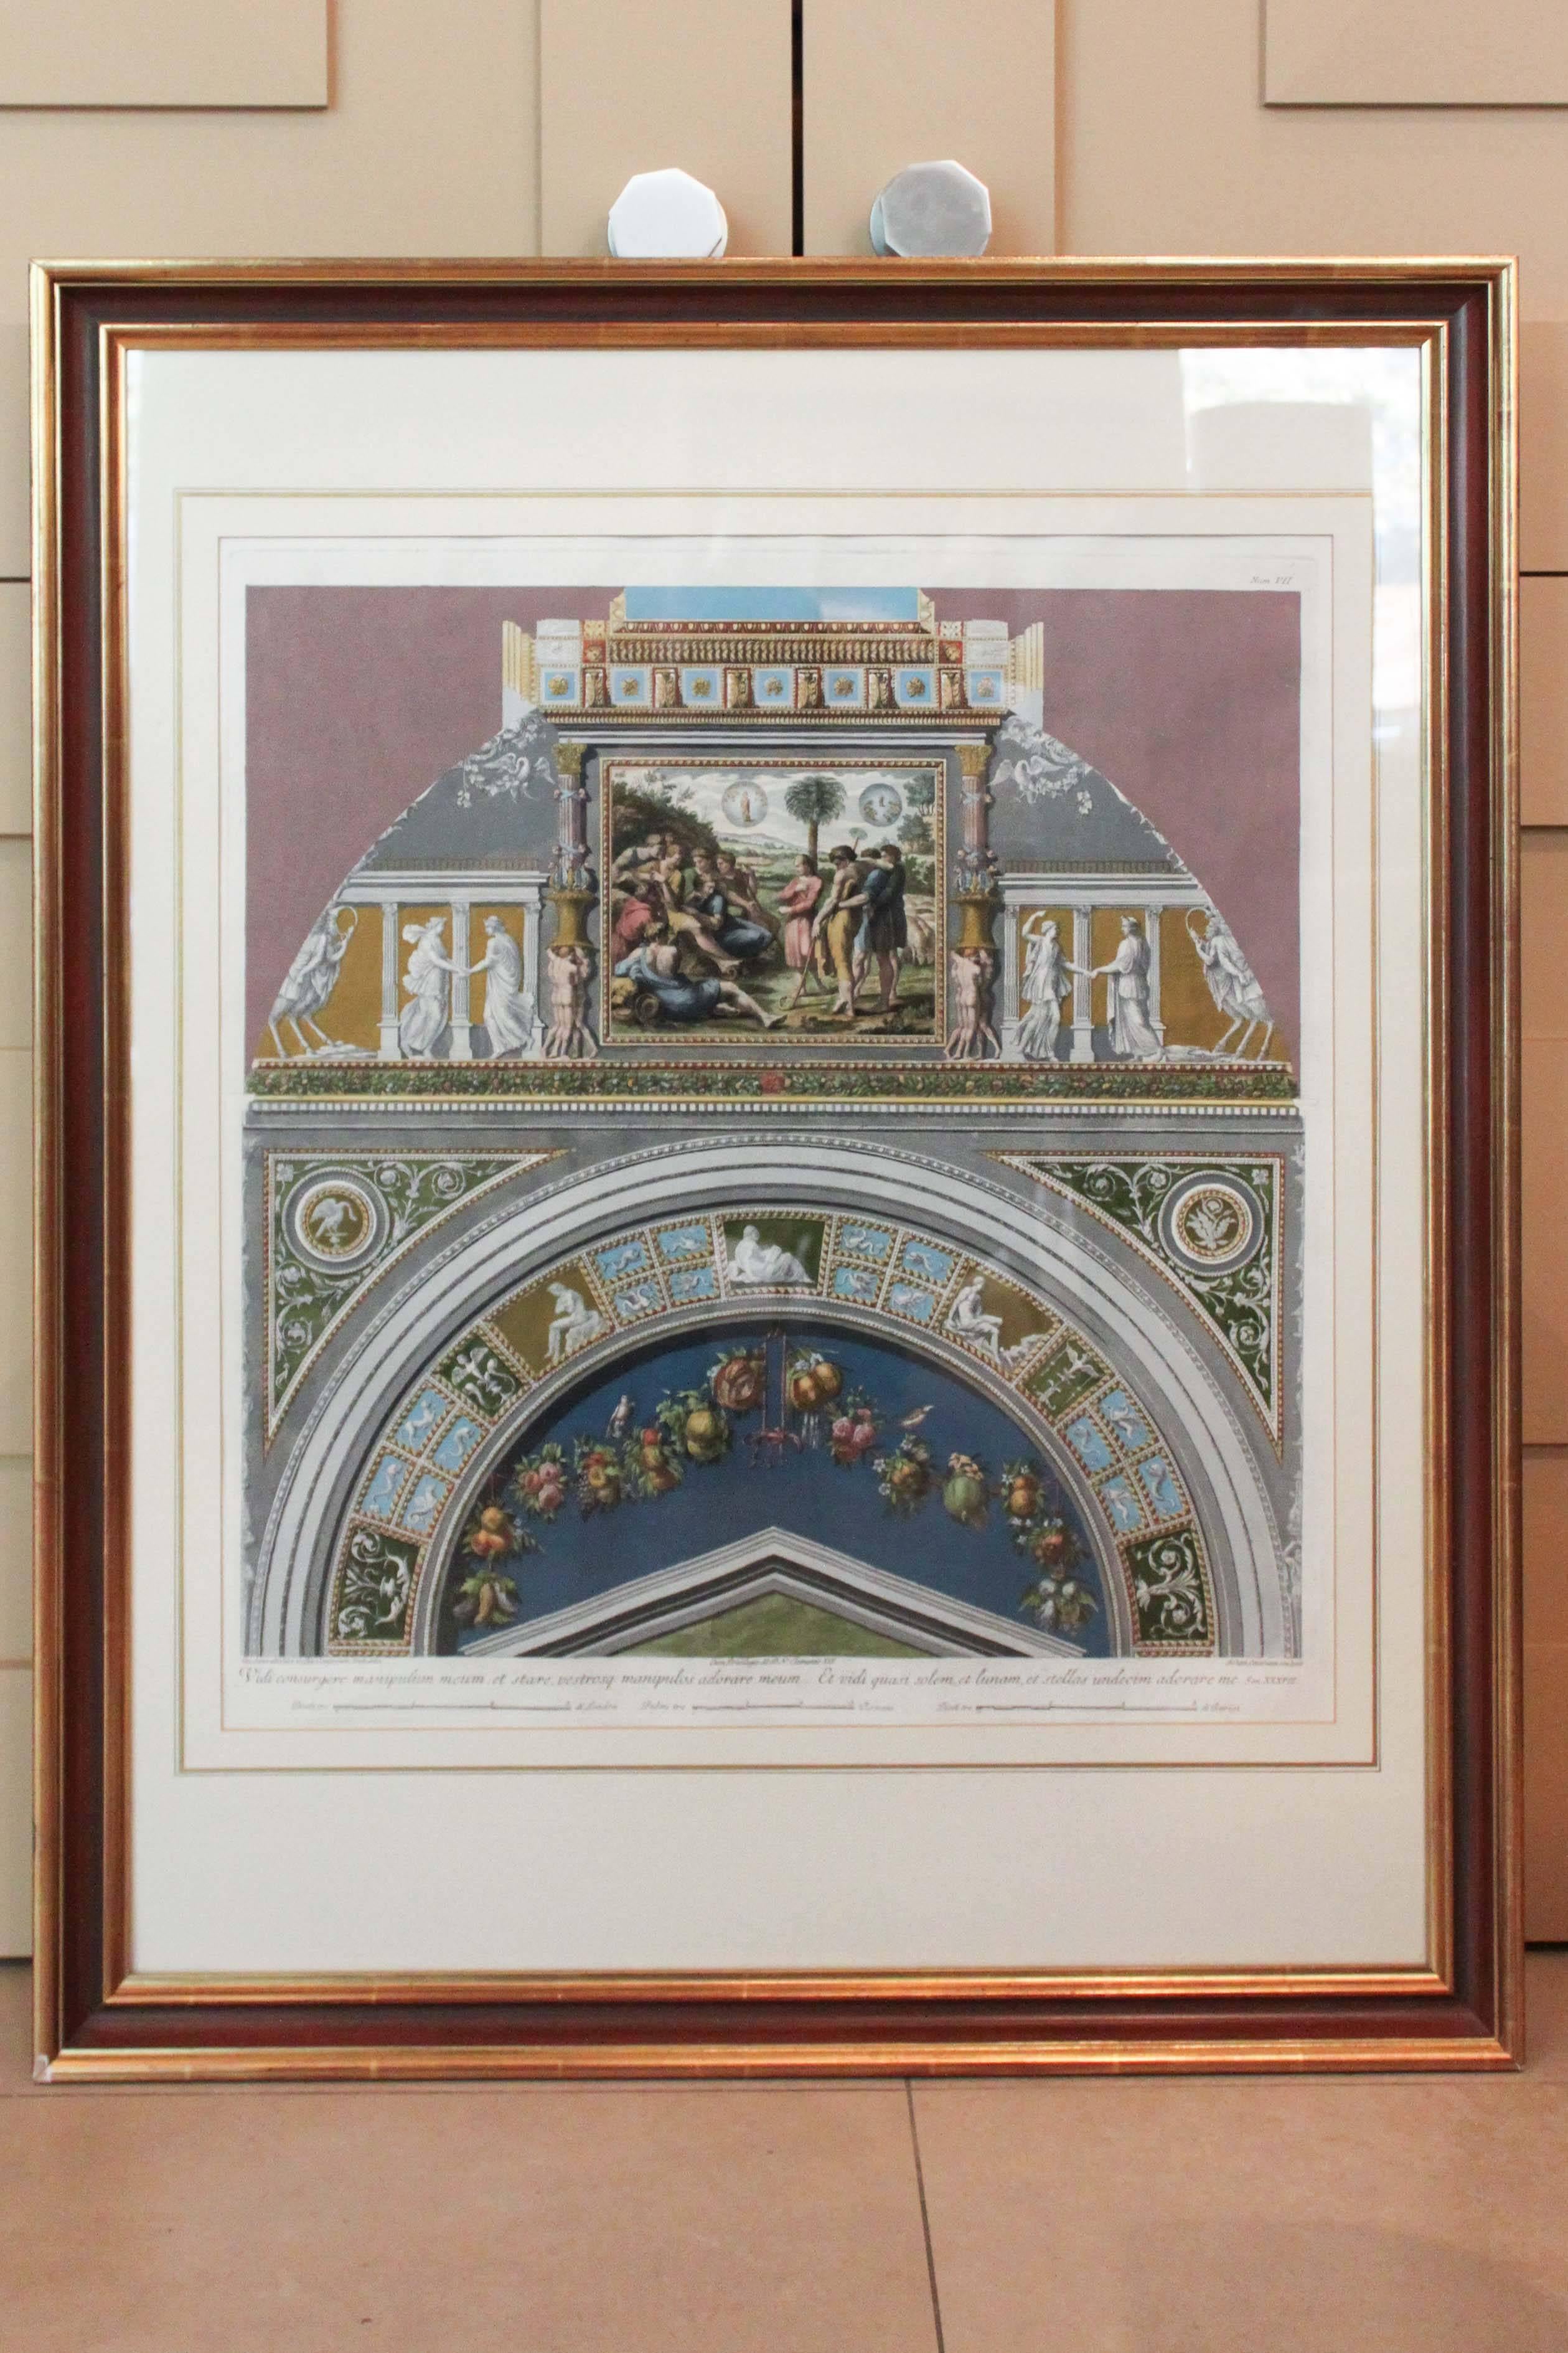 Set of six engravings out of a complete thirteen available. Colourful neoclassical works after Raphael of the Vatican Loggia. Professionally mounted and framed with minor losses/irregularities in frame and minor wave in some of the prints consistent